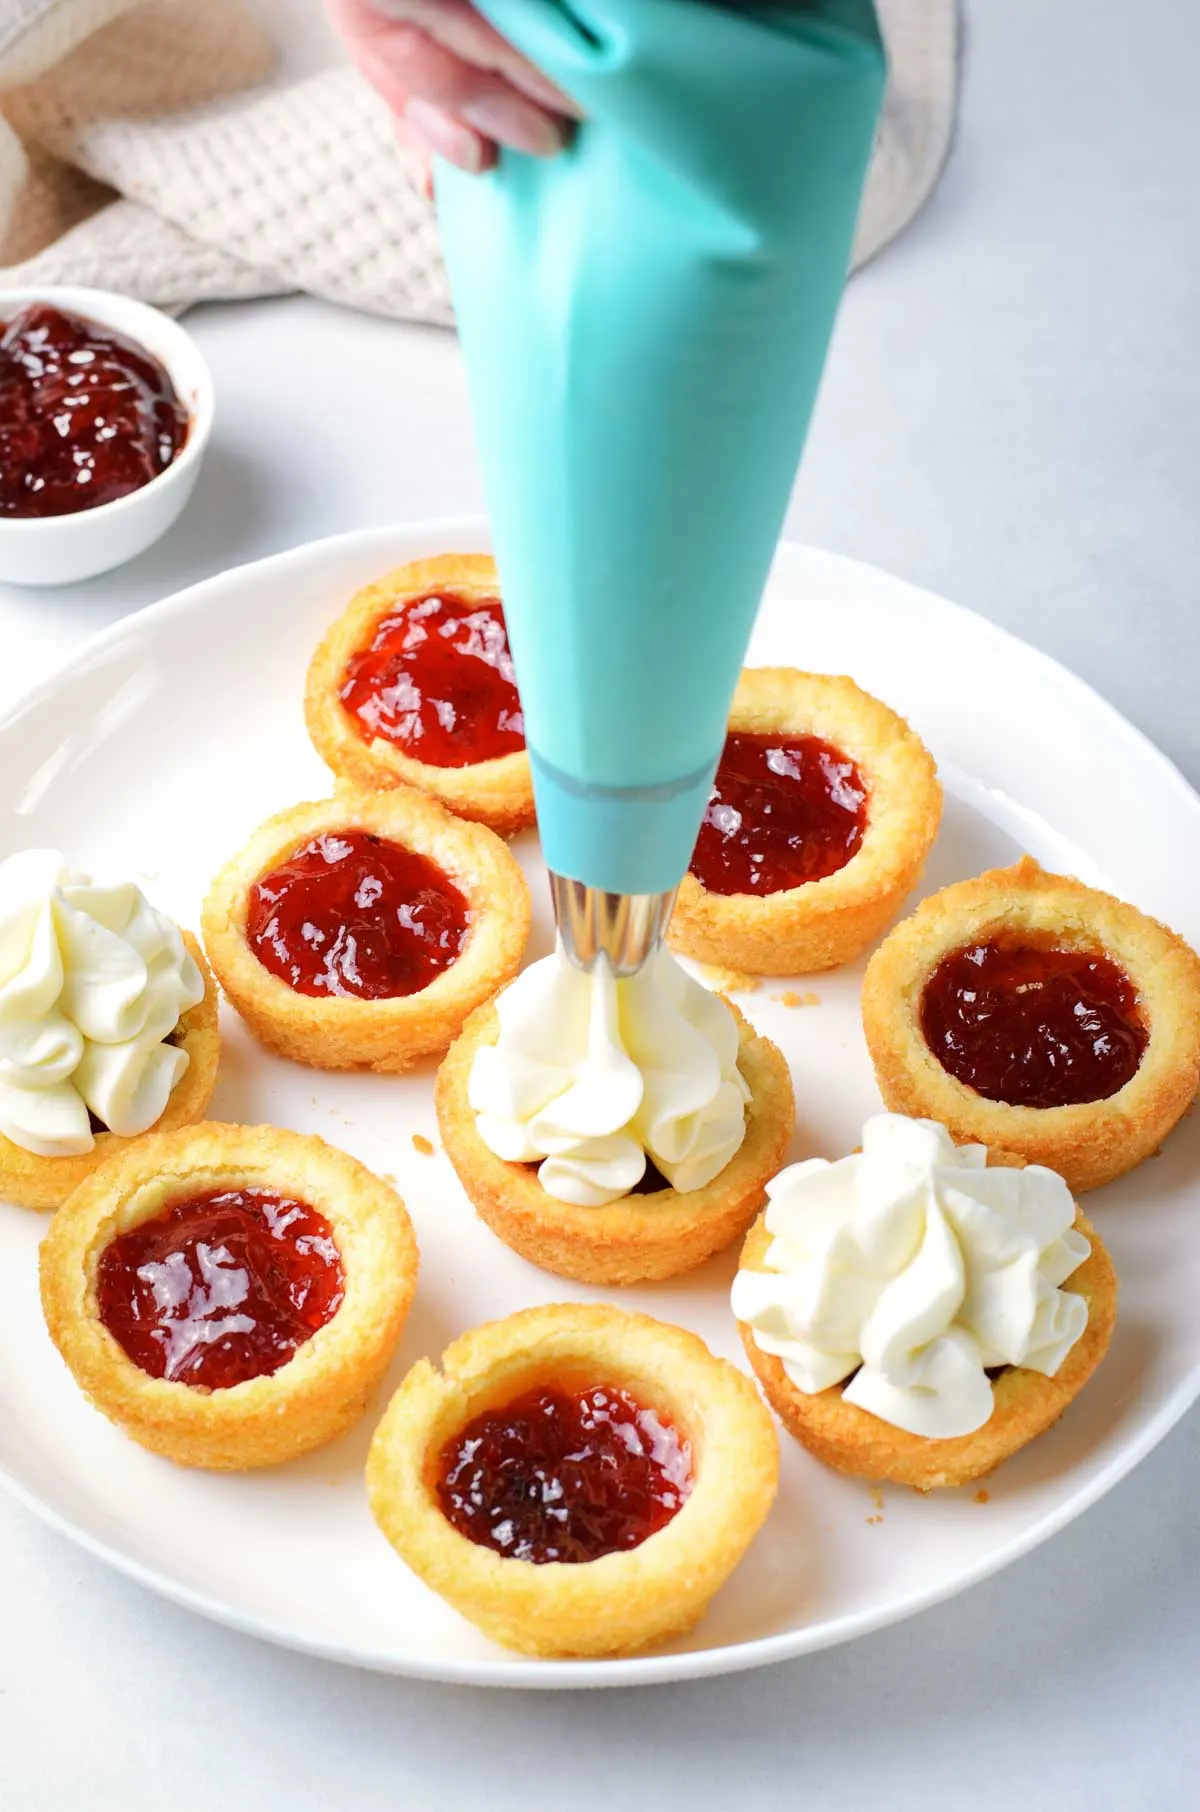 Piping cheesecake filling on a sugar cookie cup filled with jam